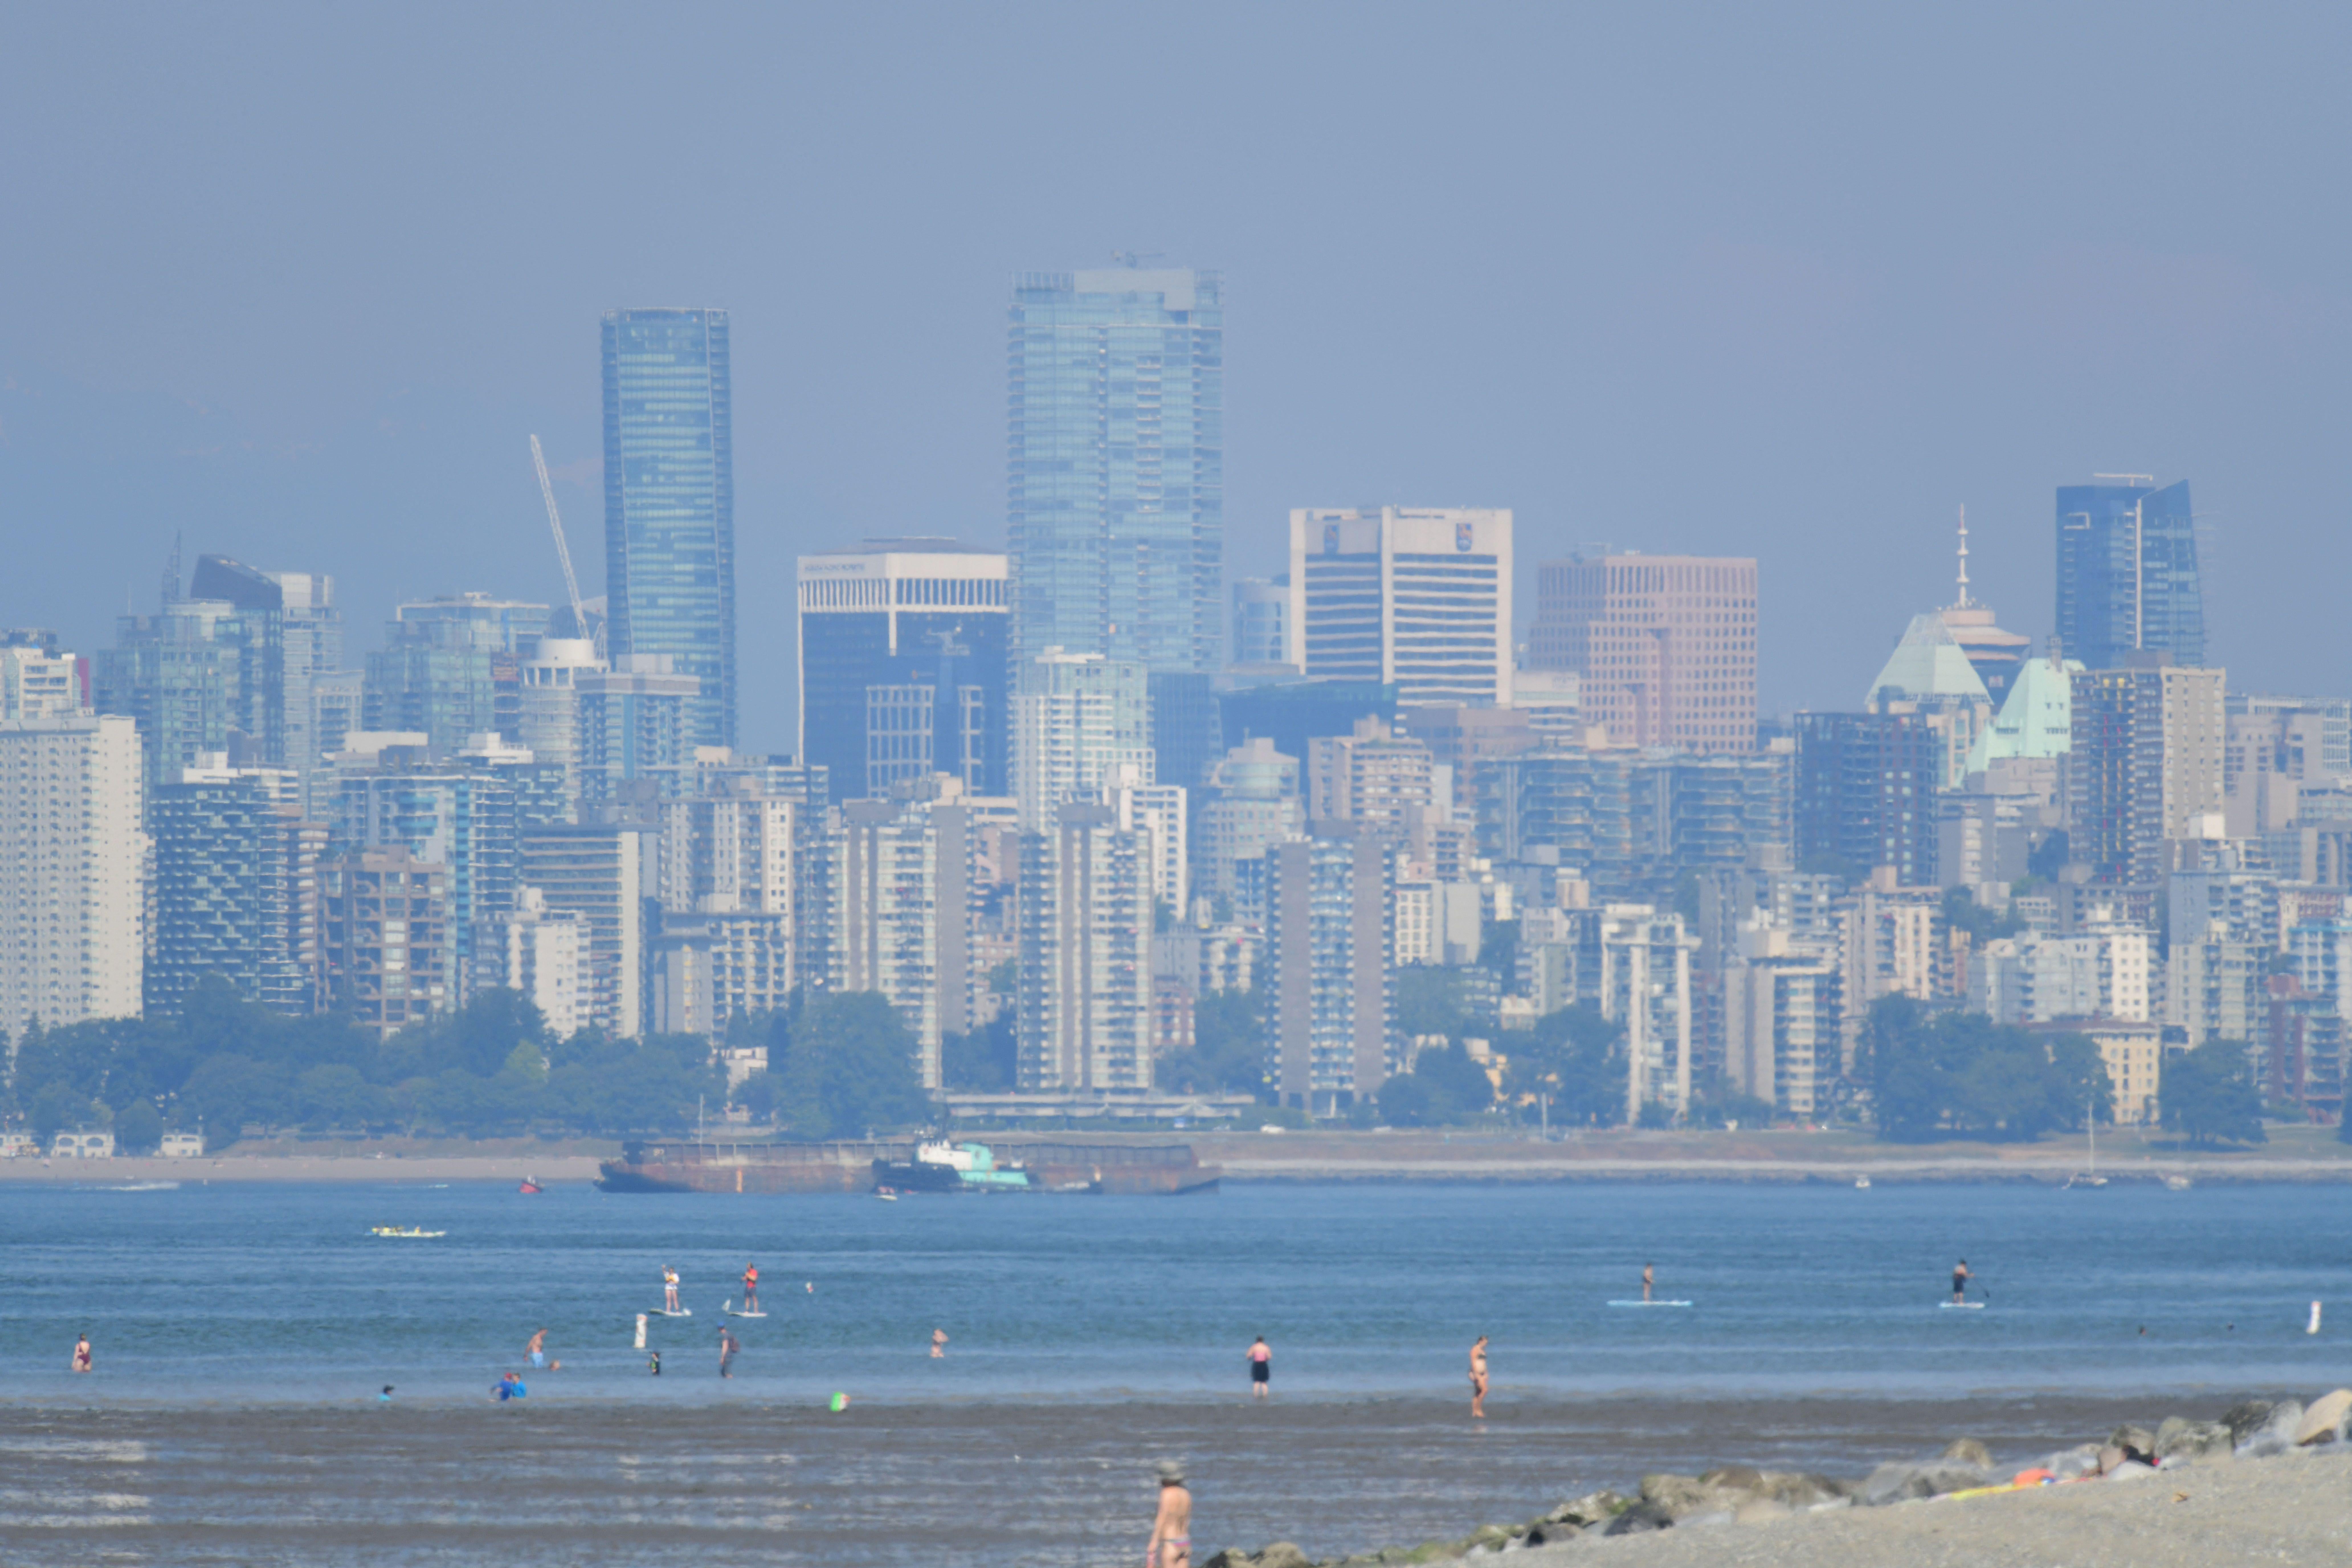 Vancouver, British Columbia, seen through a haze on a scorching hot day